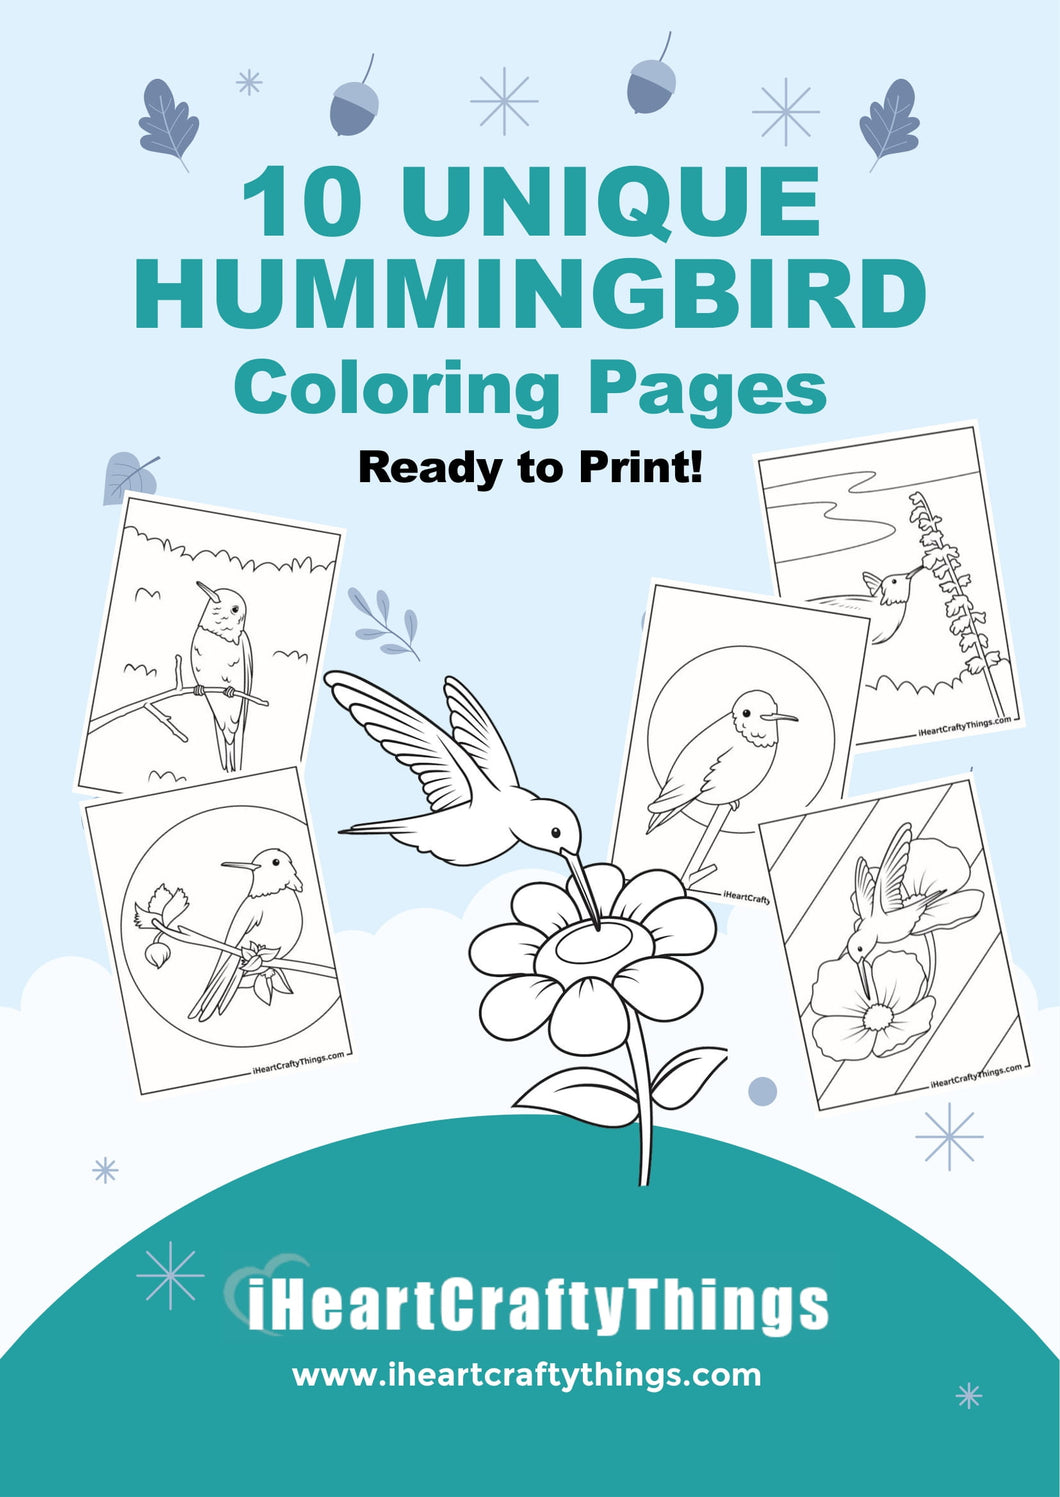 10 HUMMINGBIRD COLORING PAGES